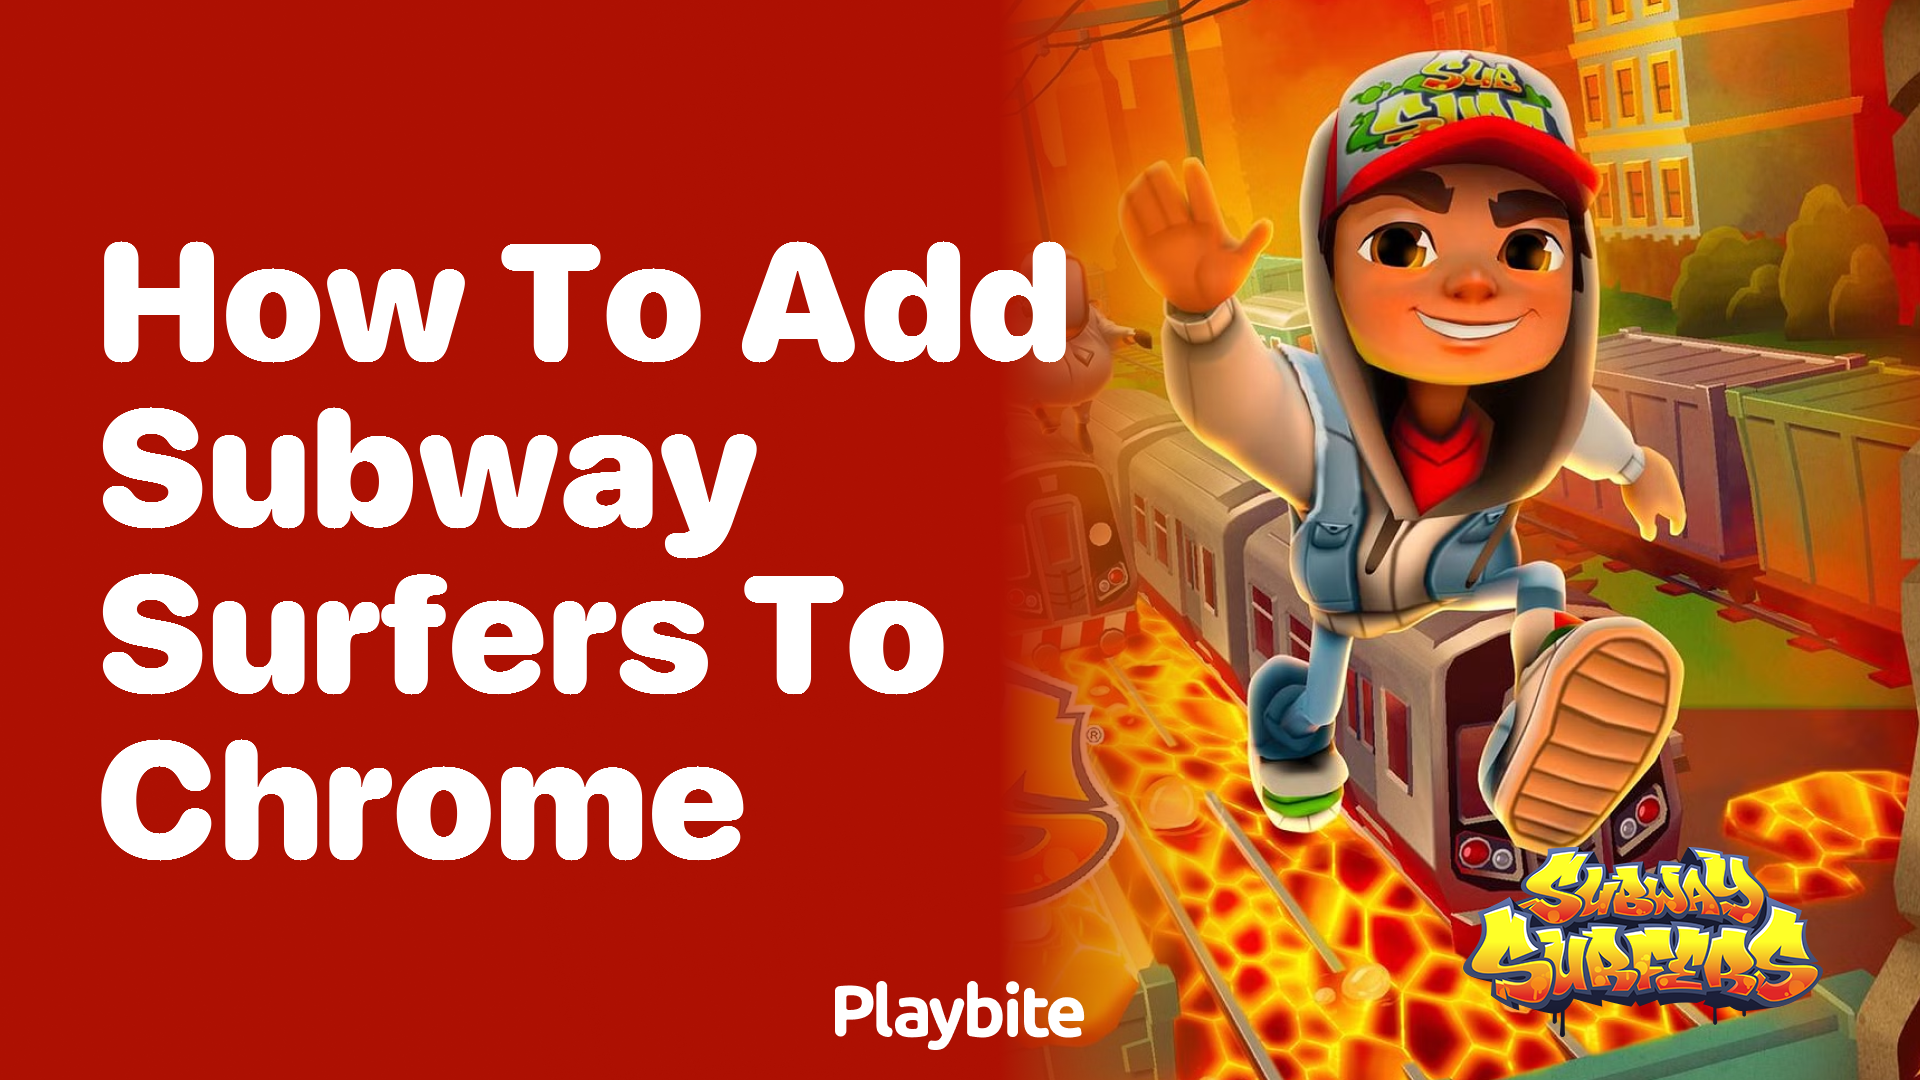 How to add Subway Surfers to Chrome